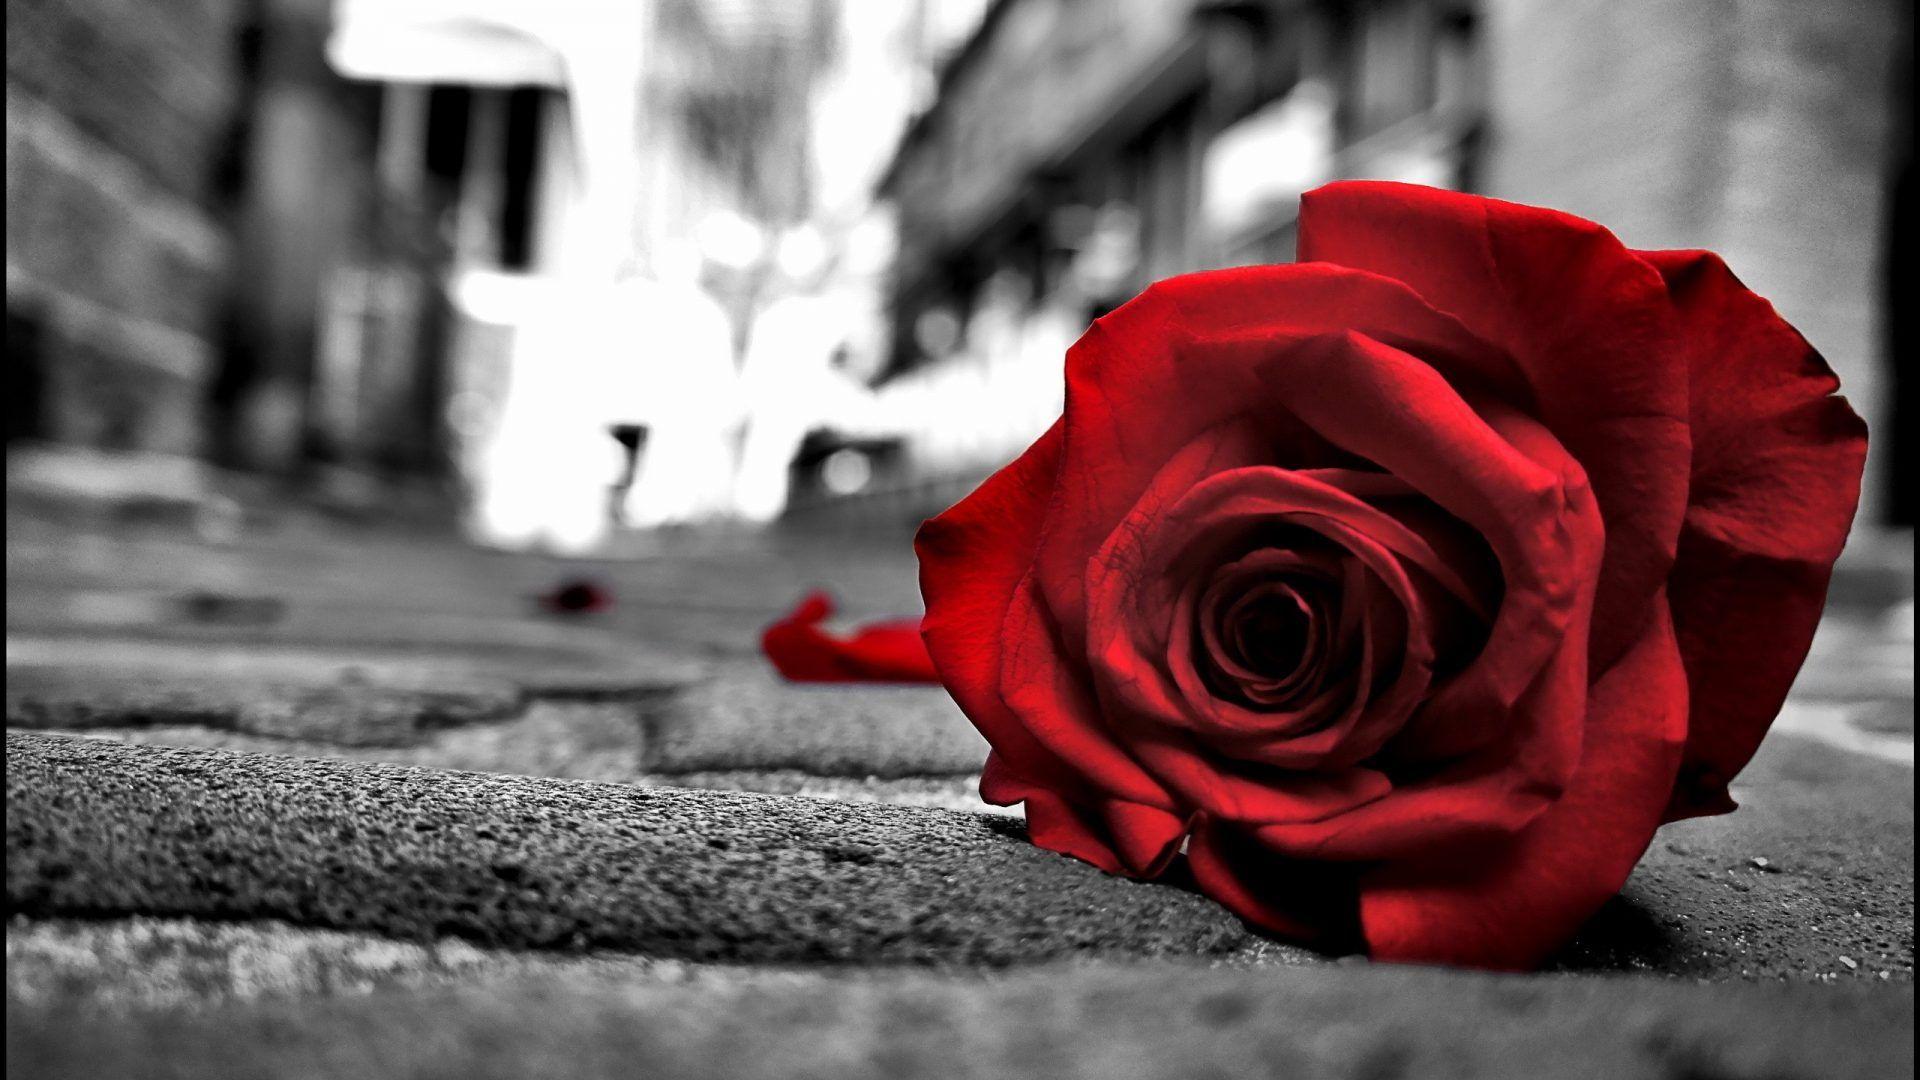 Two Tag wallpaper: Rose Passion Love Color Two Red Black